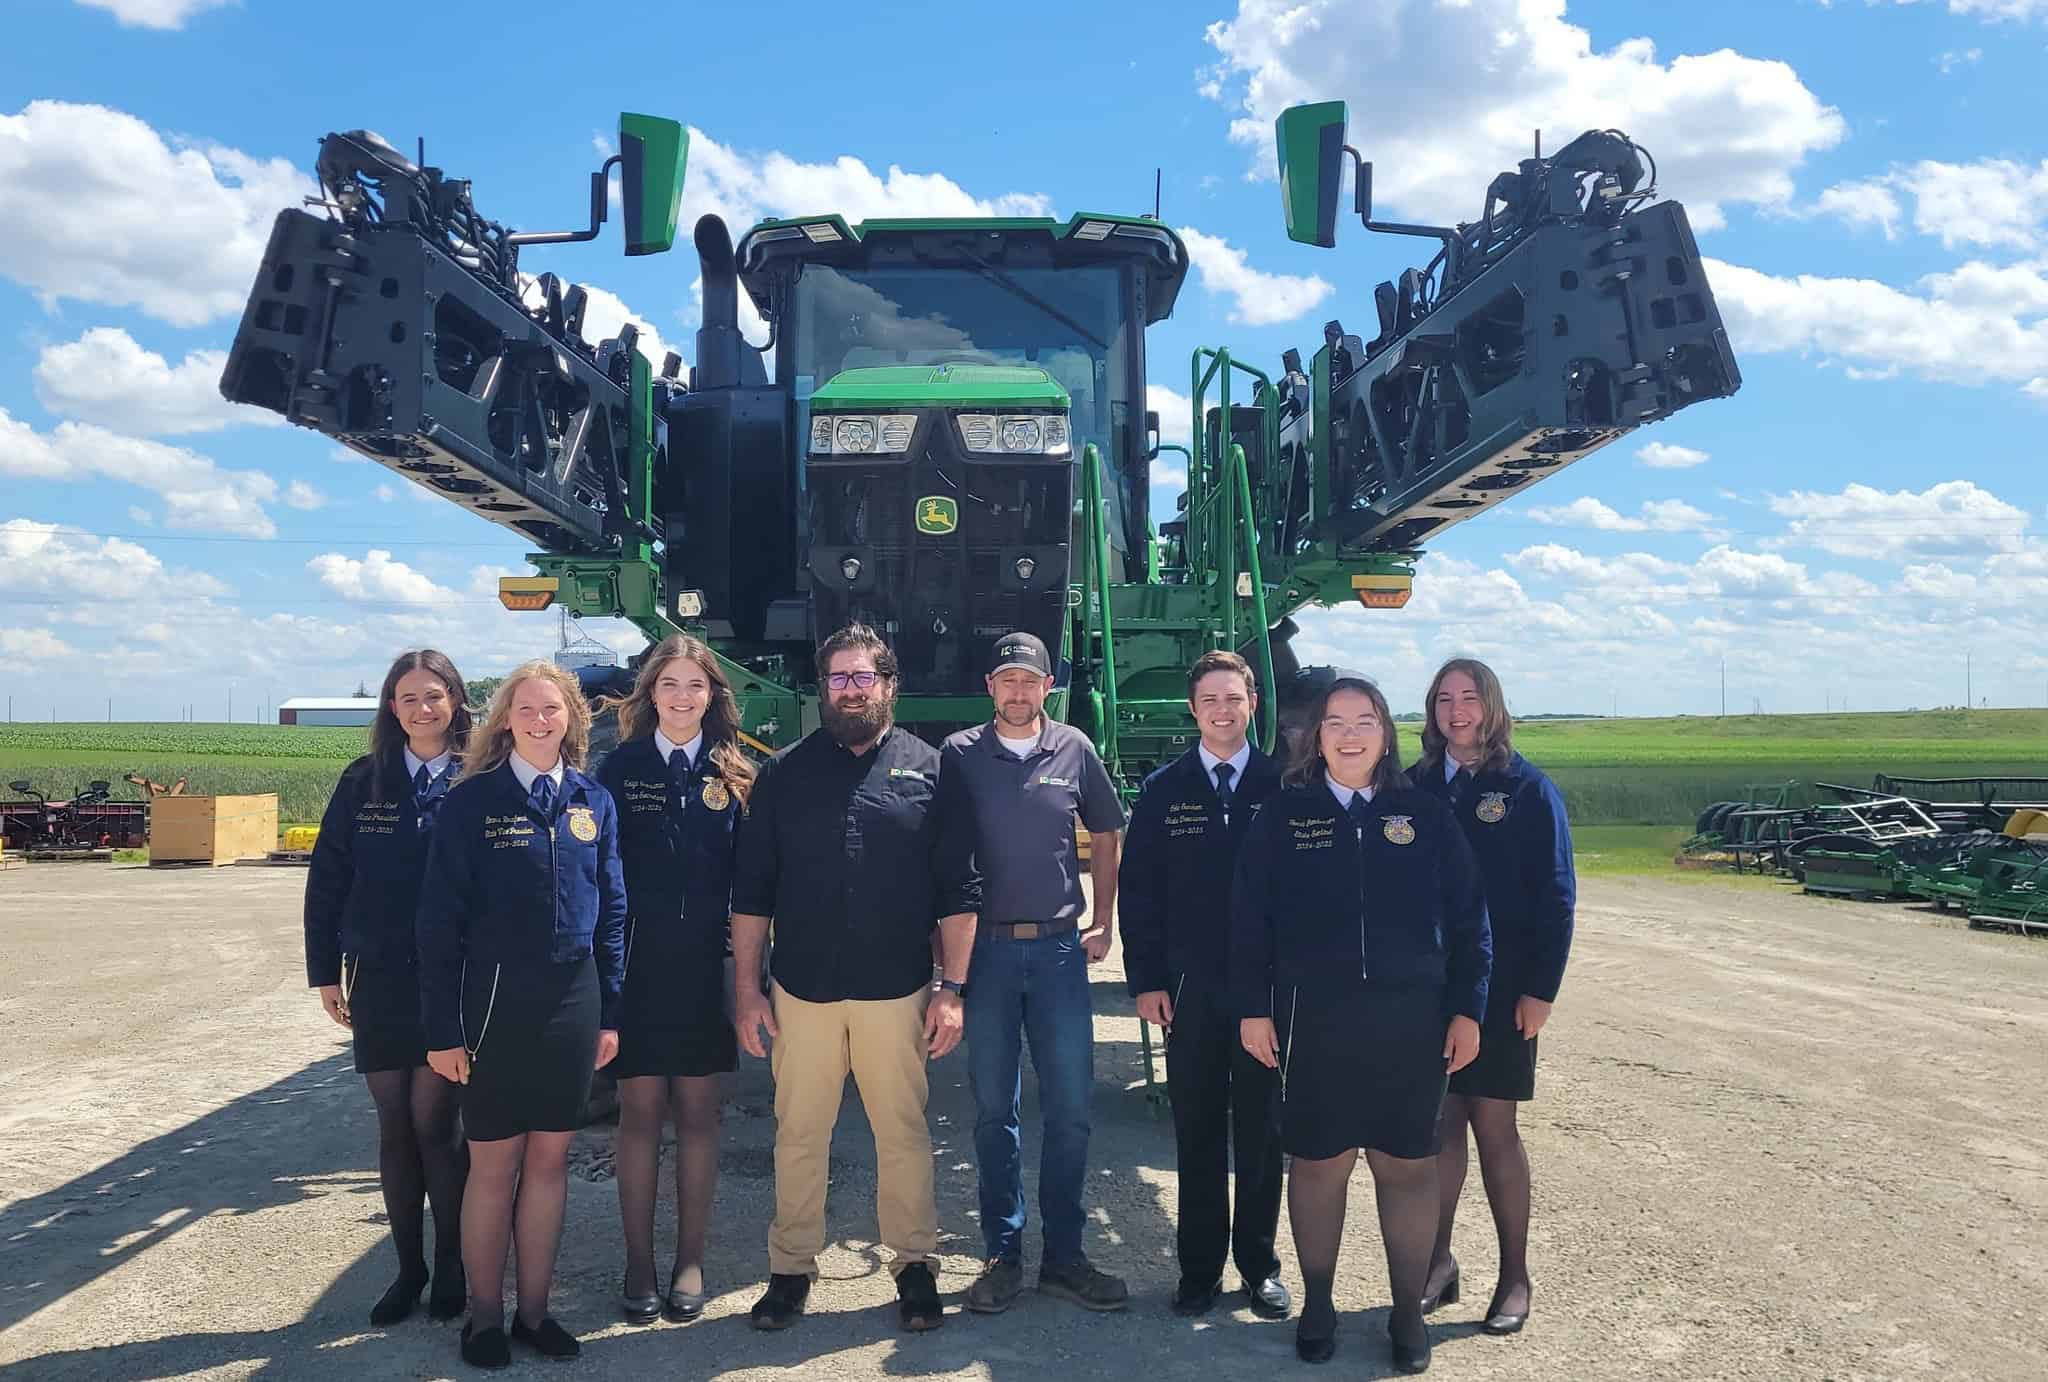 Minnesota FFA Foundation State Officers standing in front of Kibble Equipment John Deere tractor and implement.